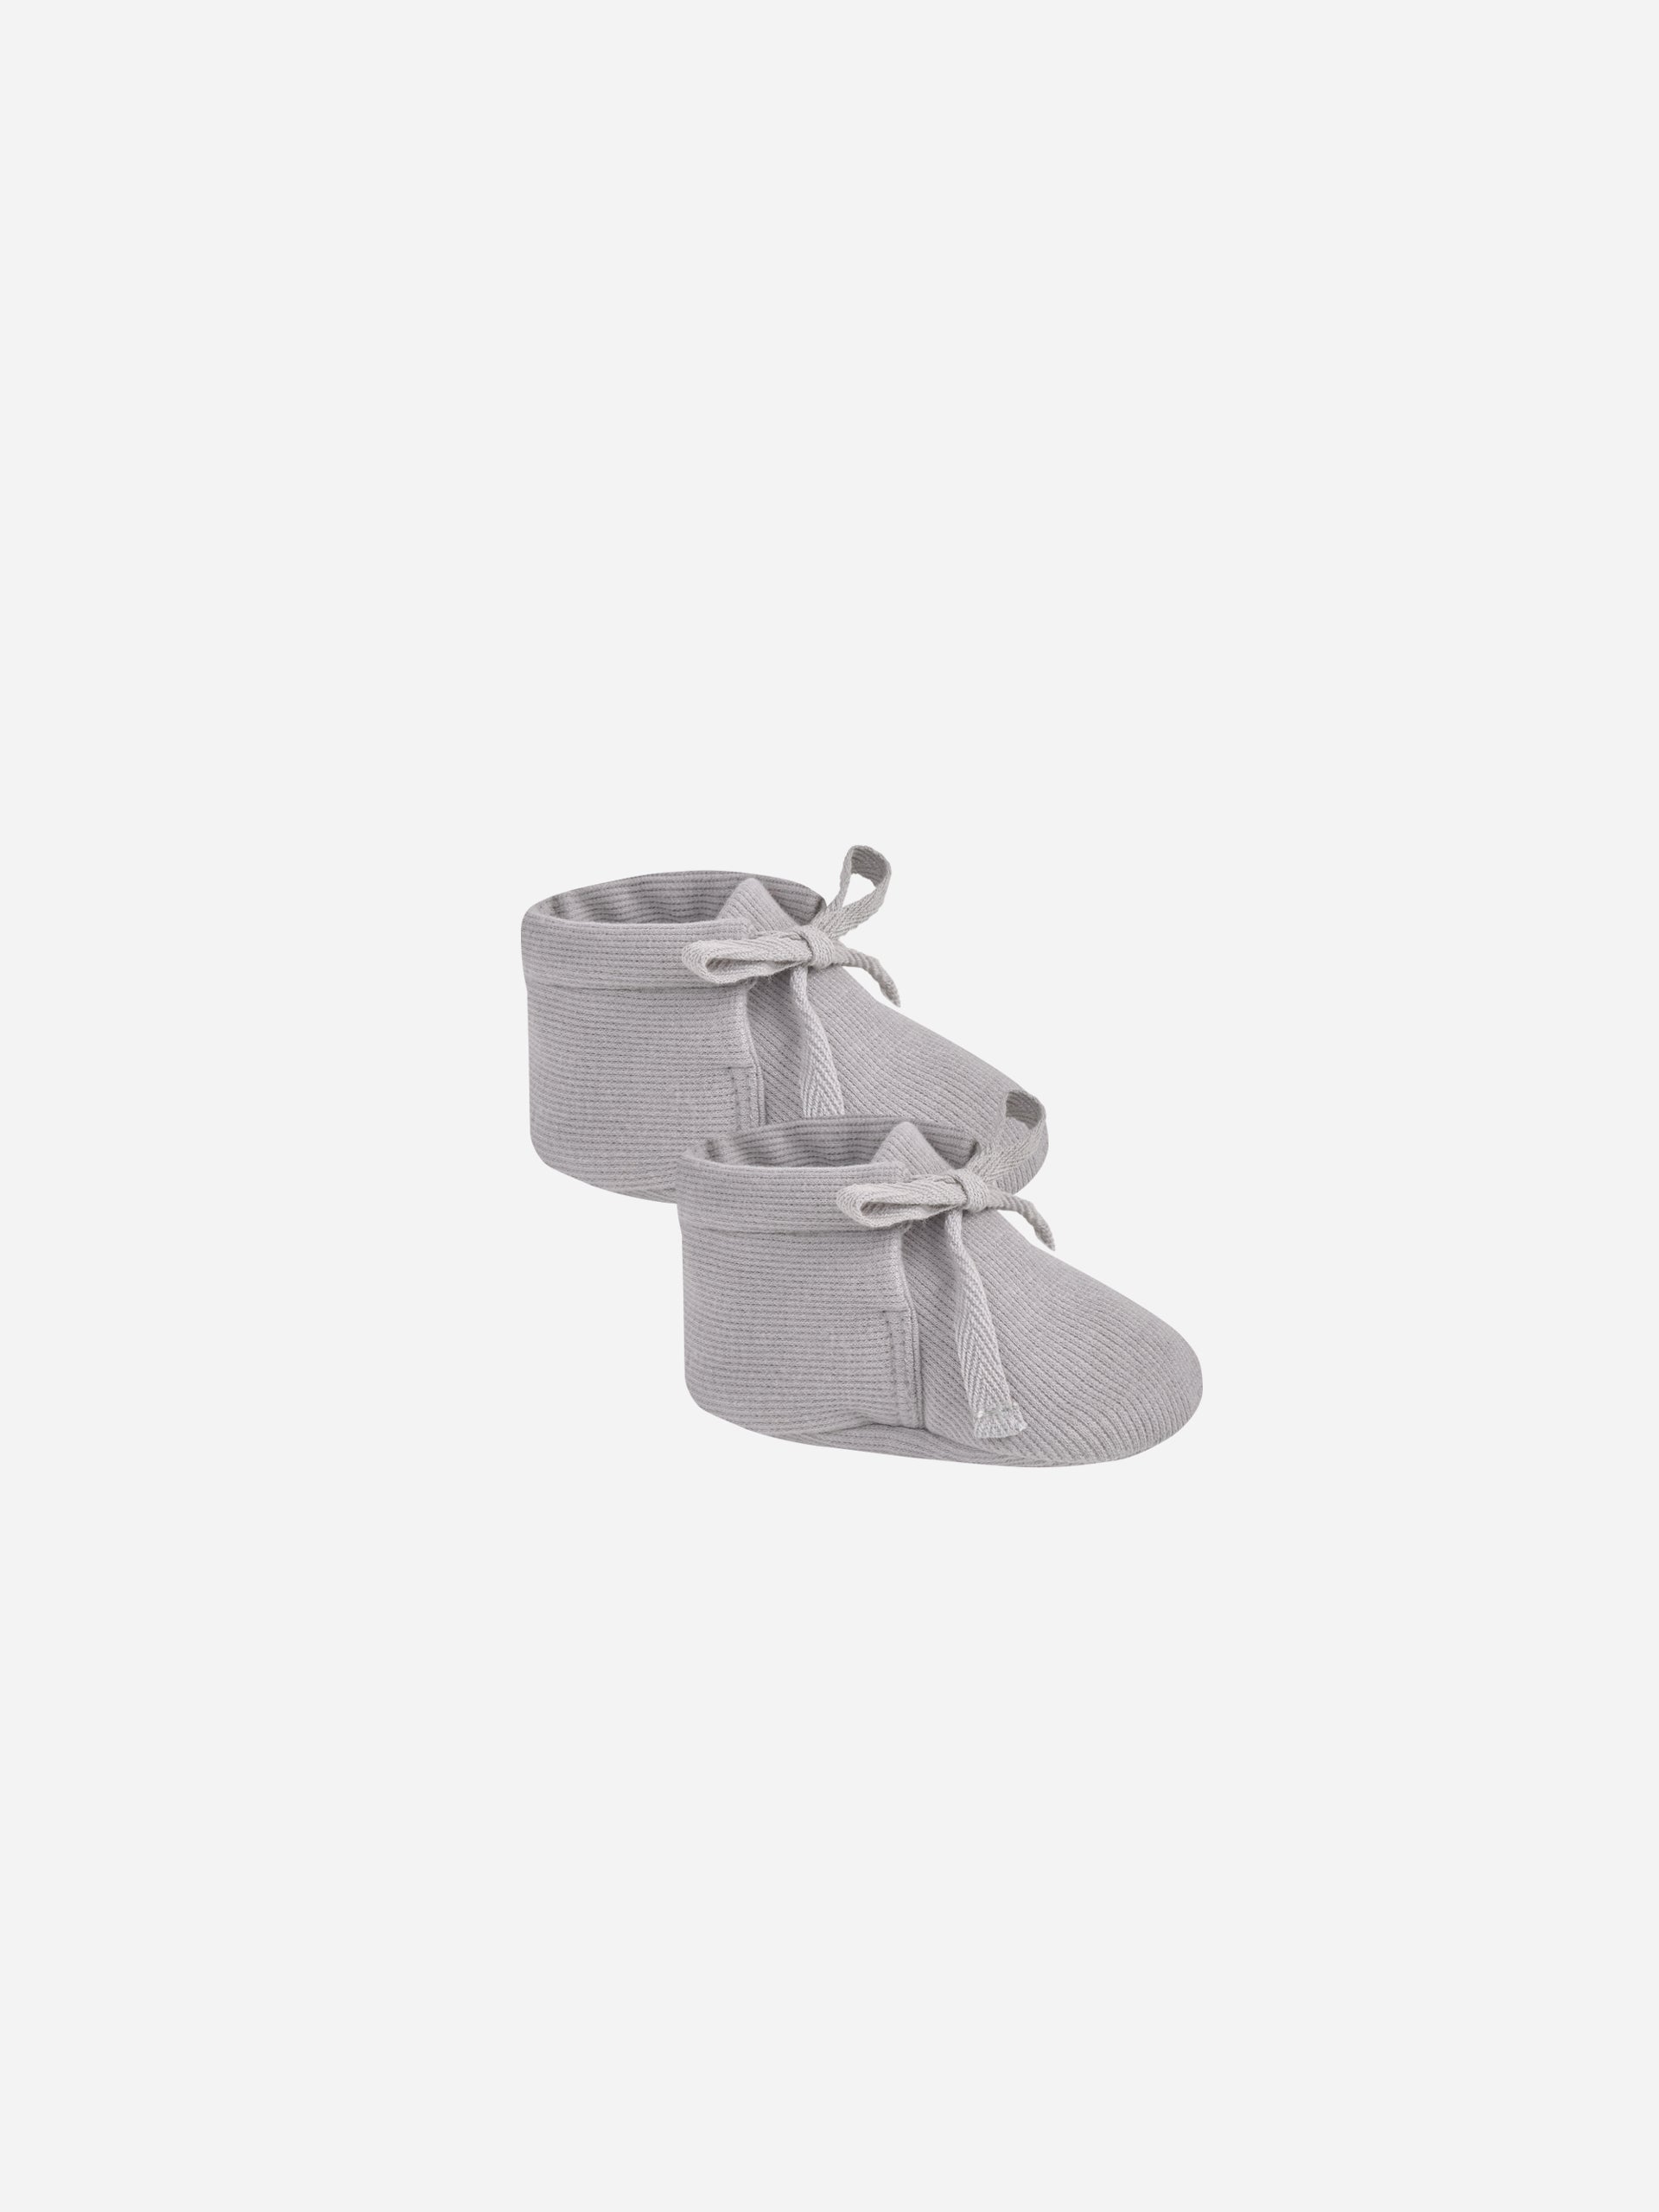 Ribbed Baby Booties || Periwinkle - Rylee + Cru | Kids Clothes | Trendy Baby Clothes | Modern Infant Outfits |